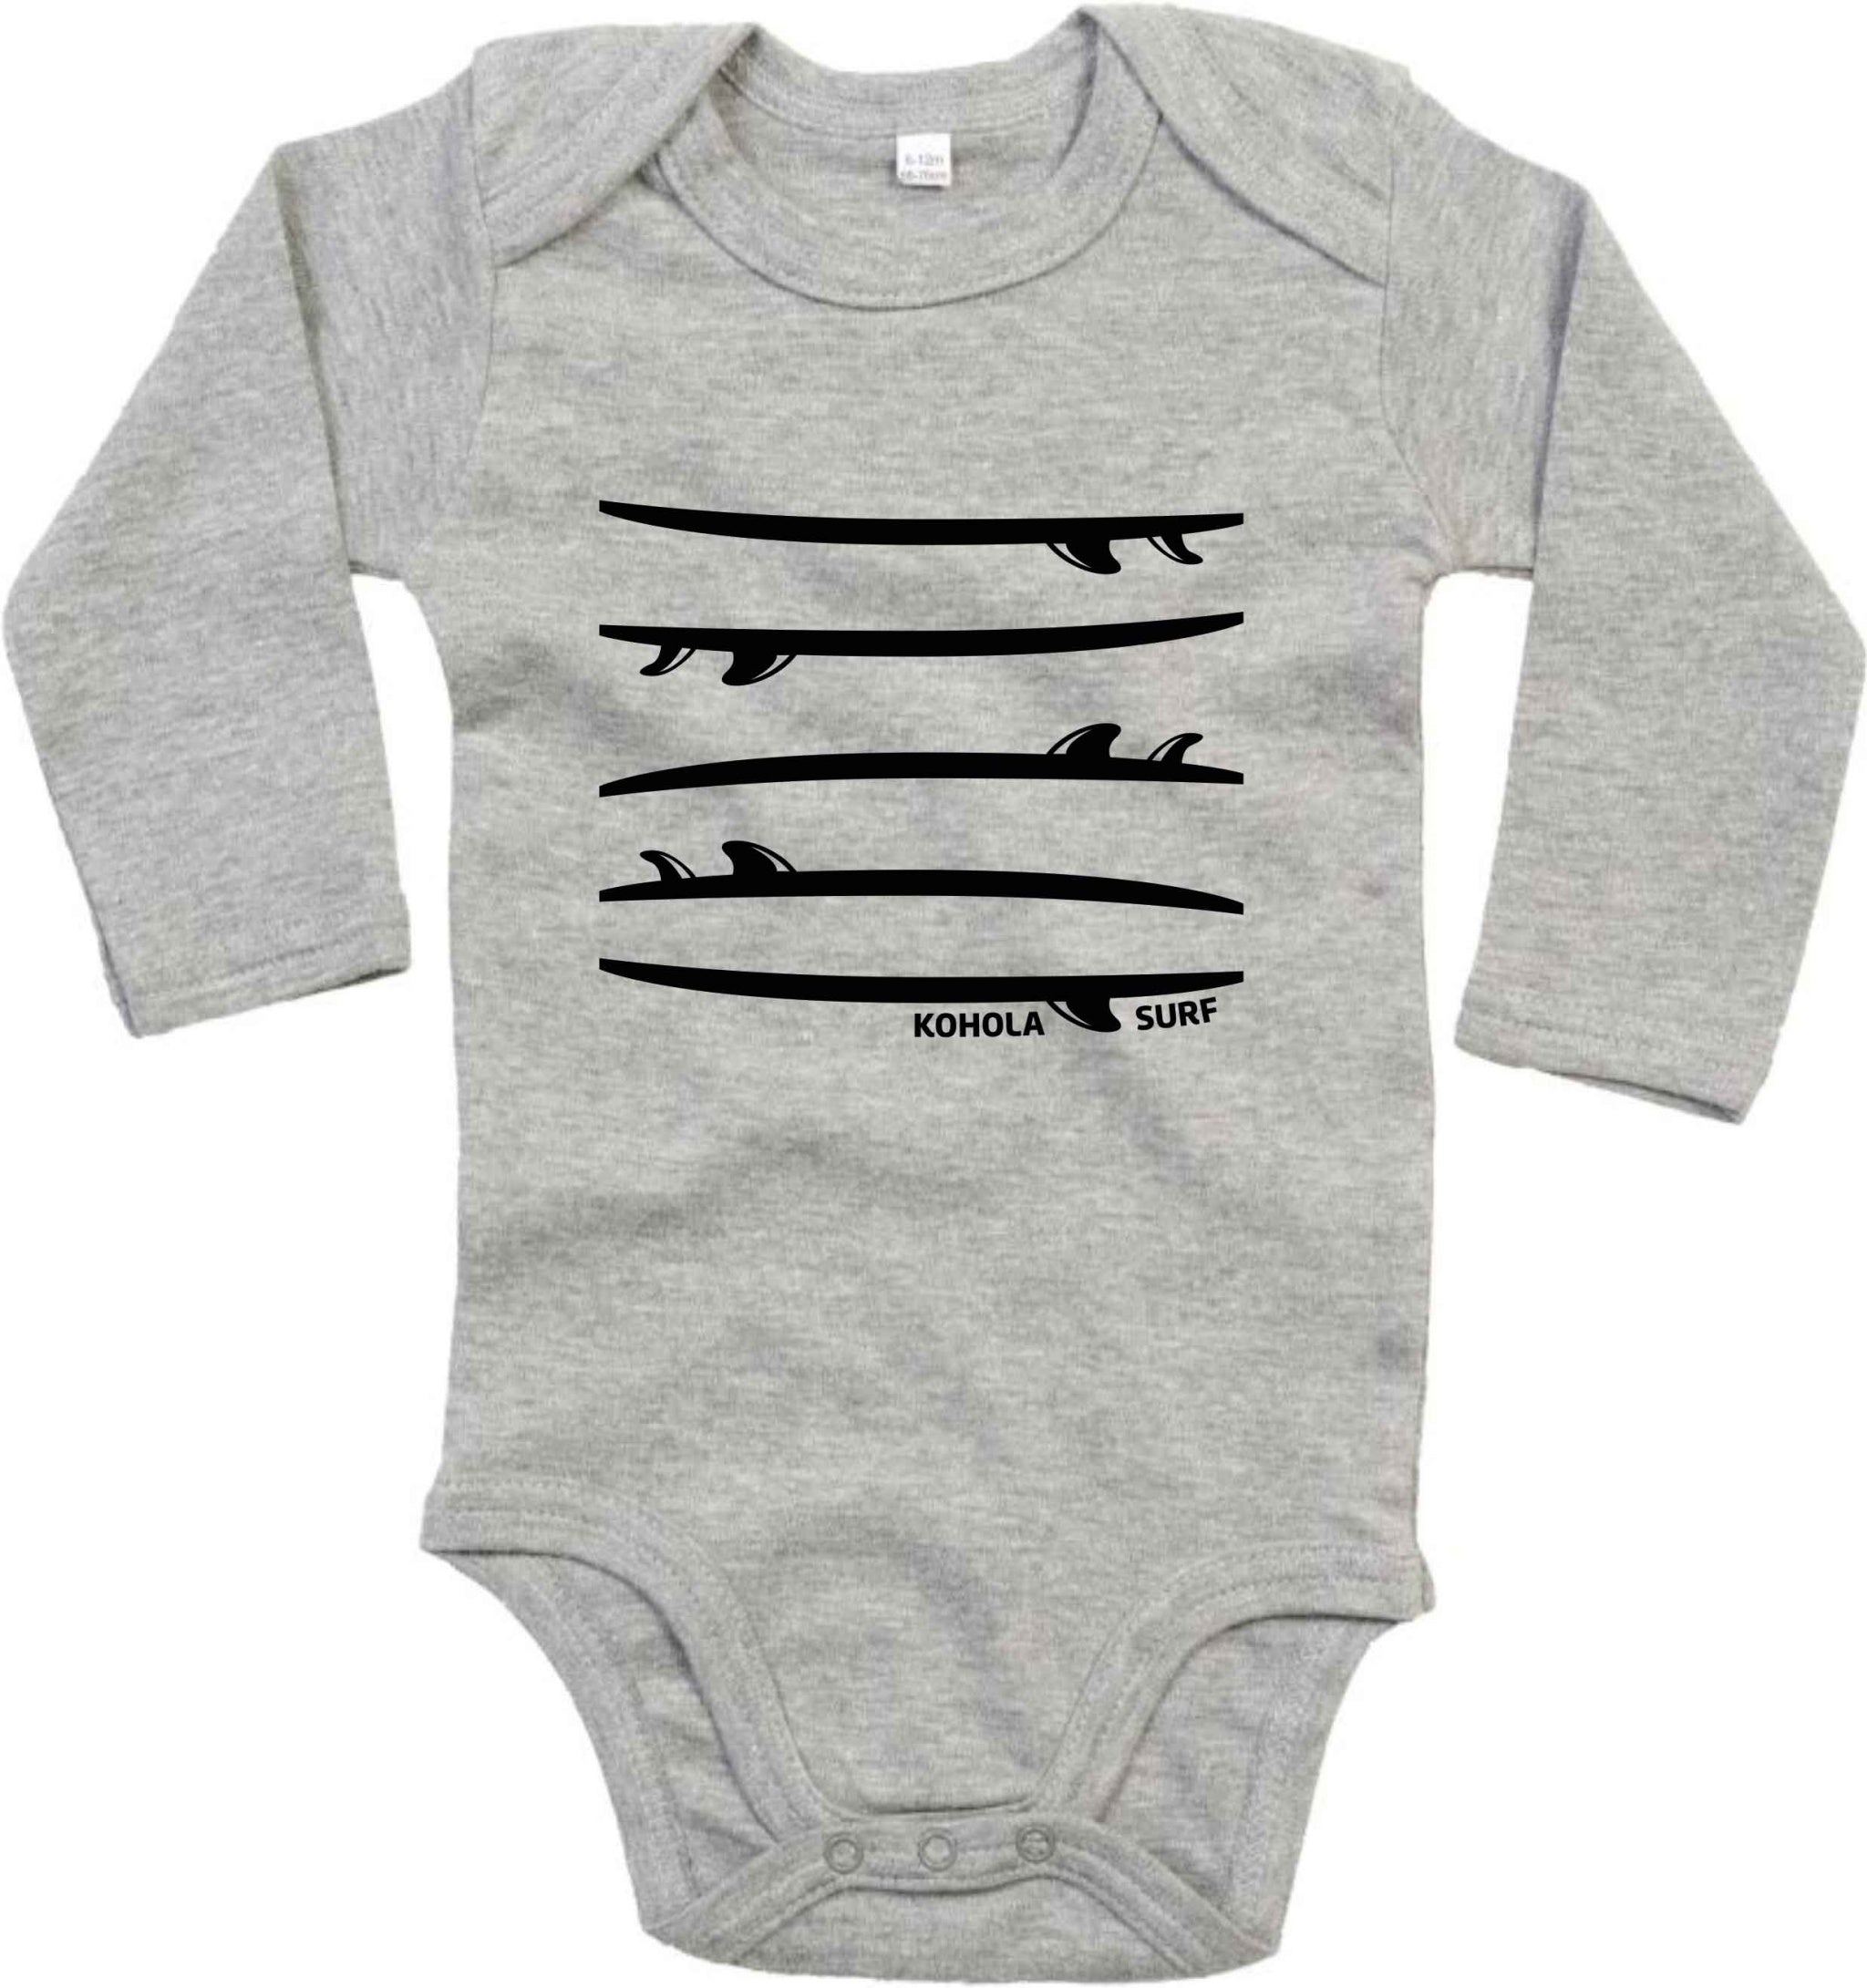 Surfboards Baby Long-Sleeved Body